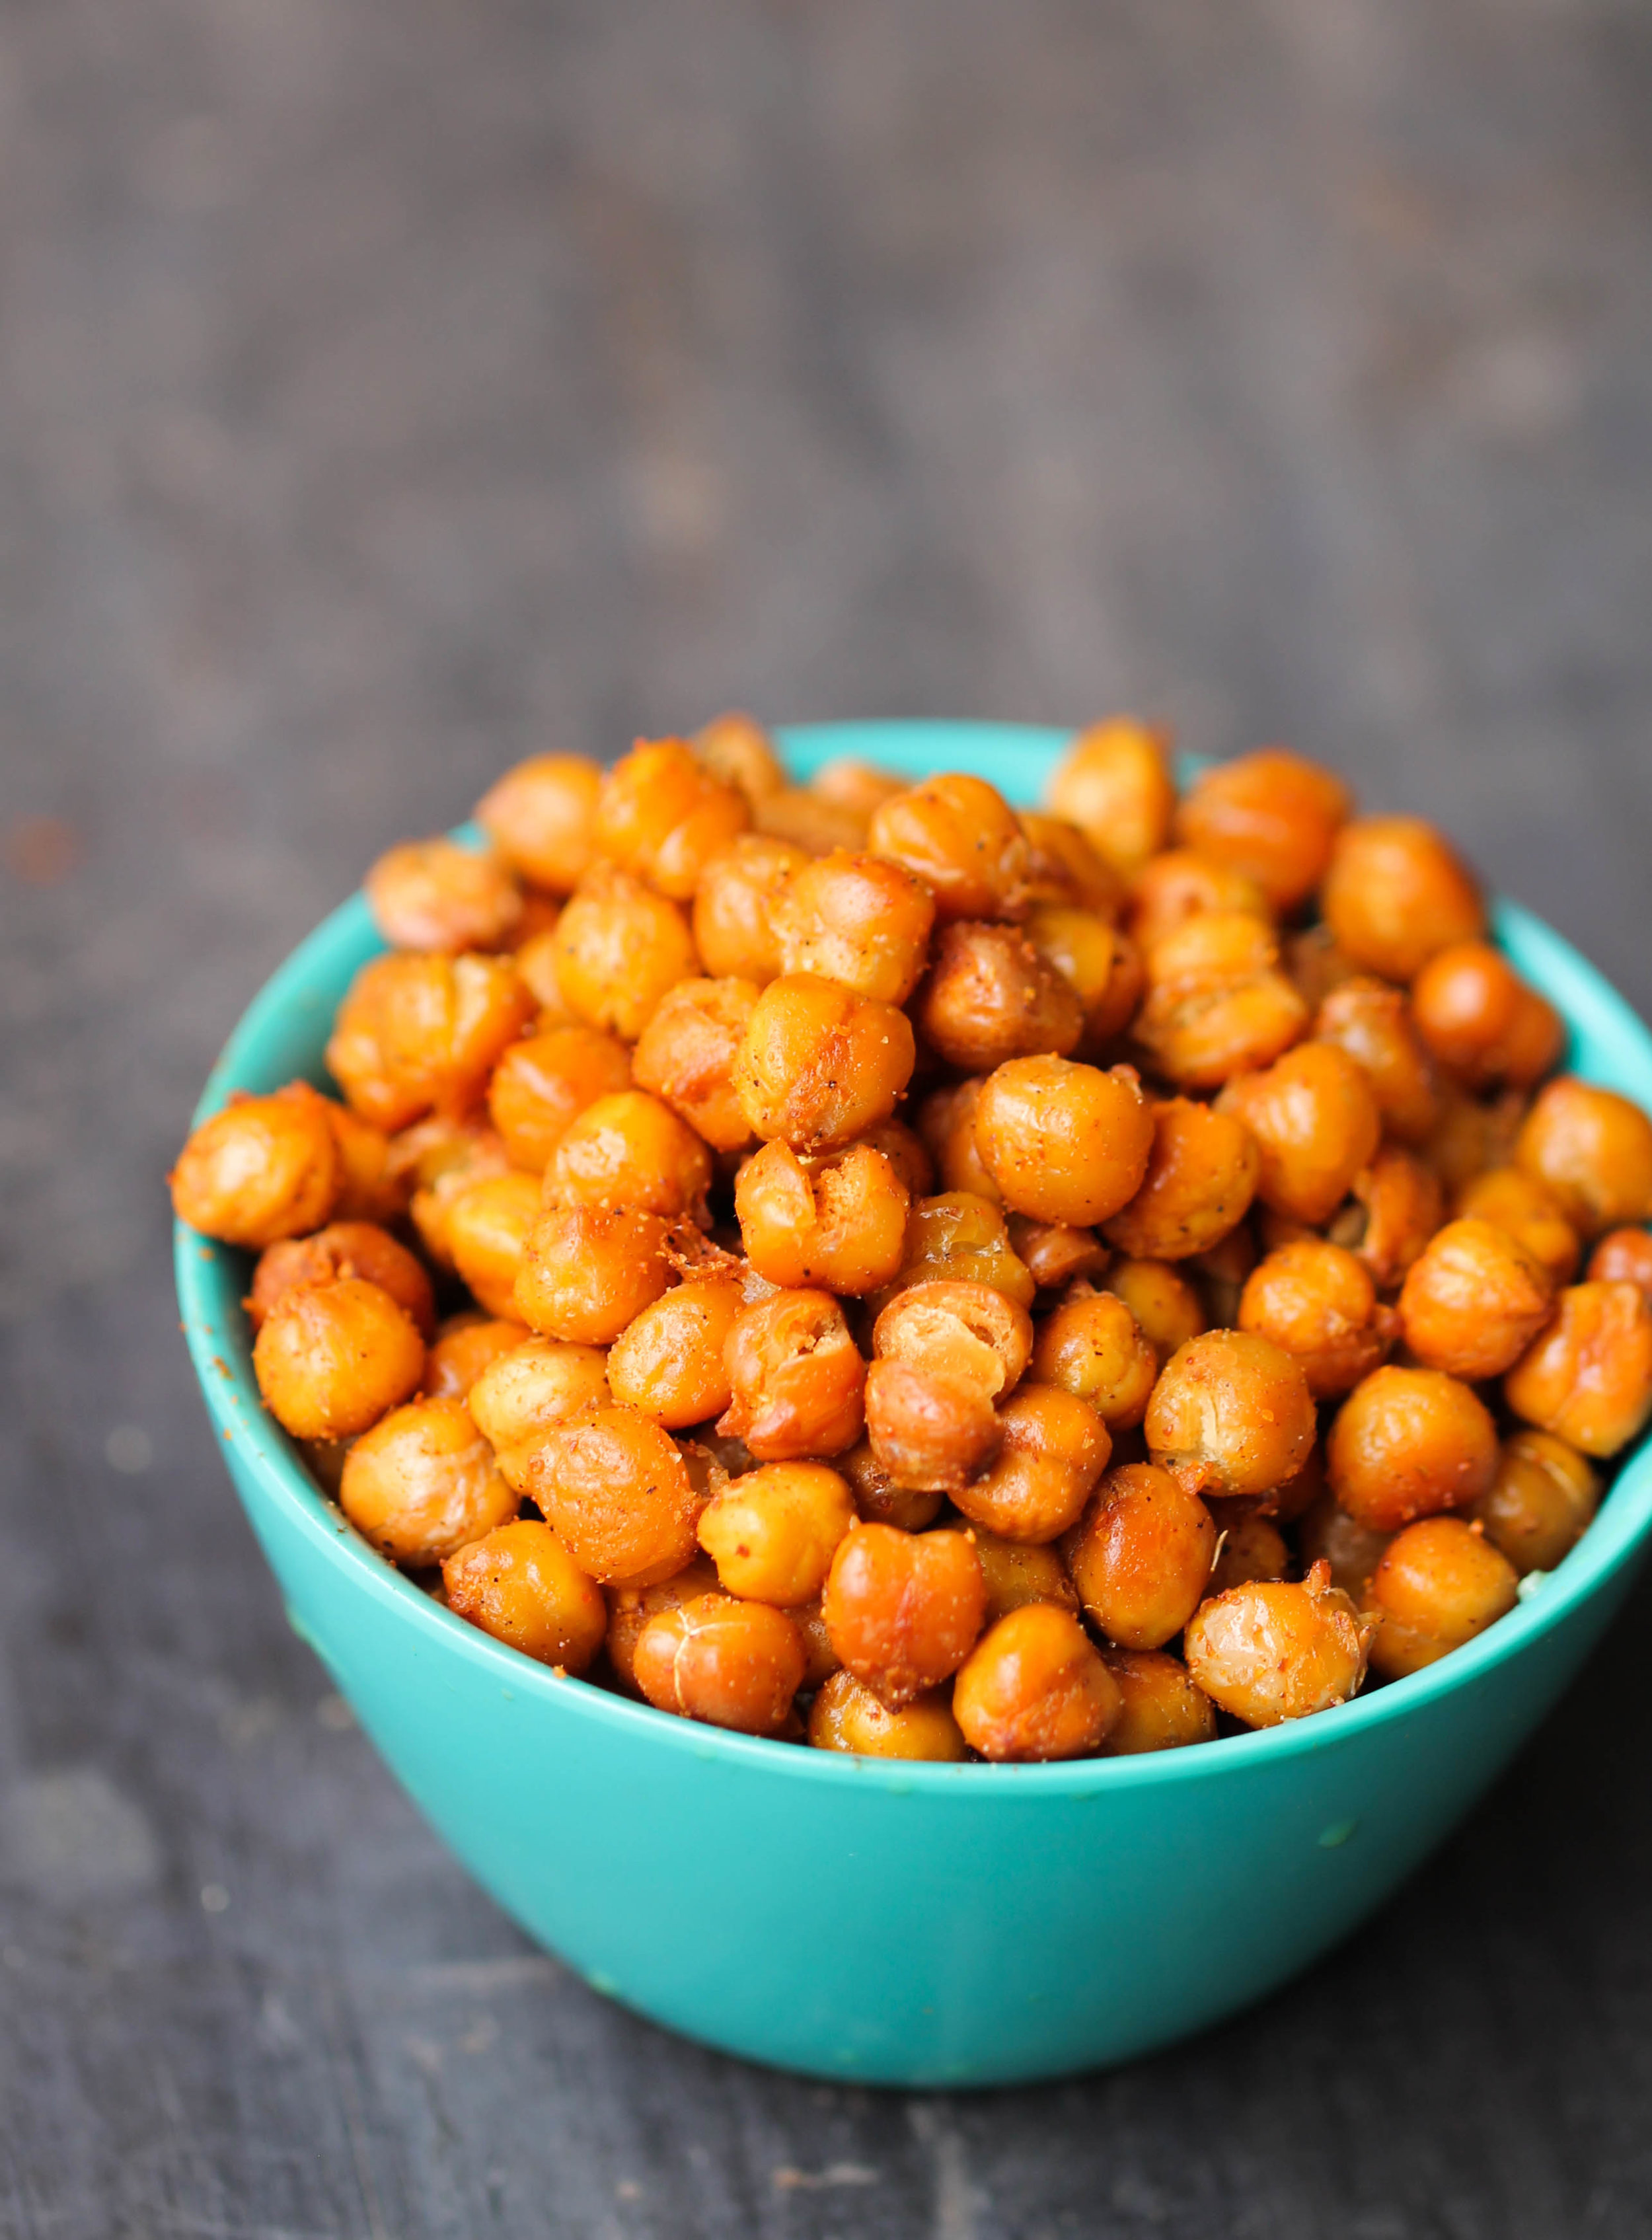 Tandoori Roasted Chickpeas make a crispy, delicious snack in 30 minutes! They are vegan, gluten-free, and very flexible with seasonings.